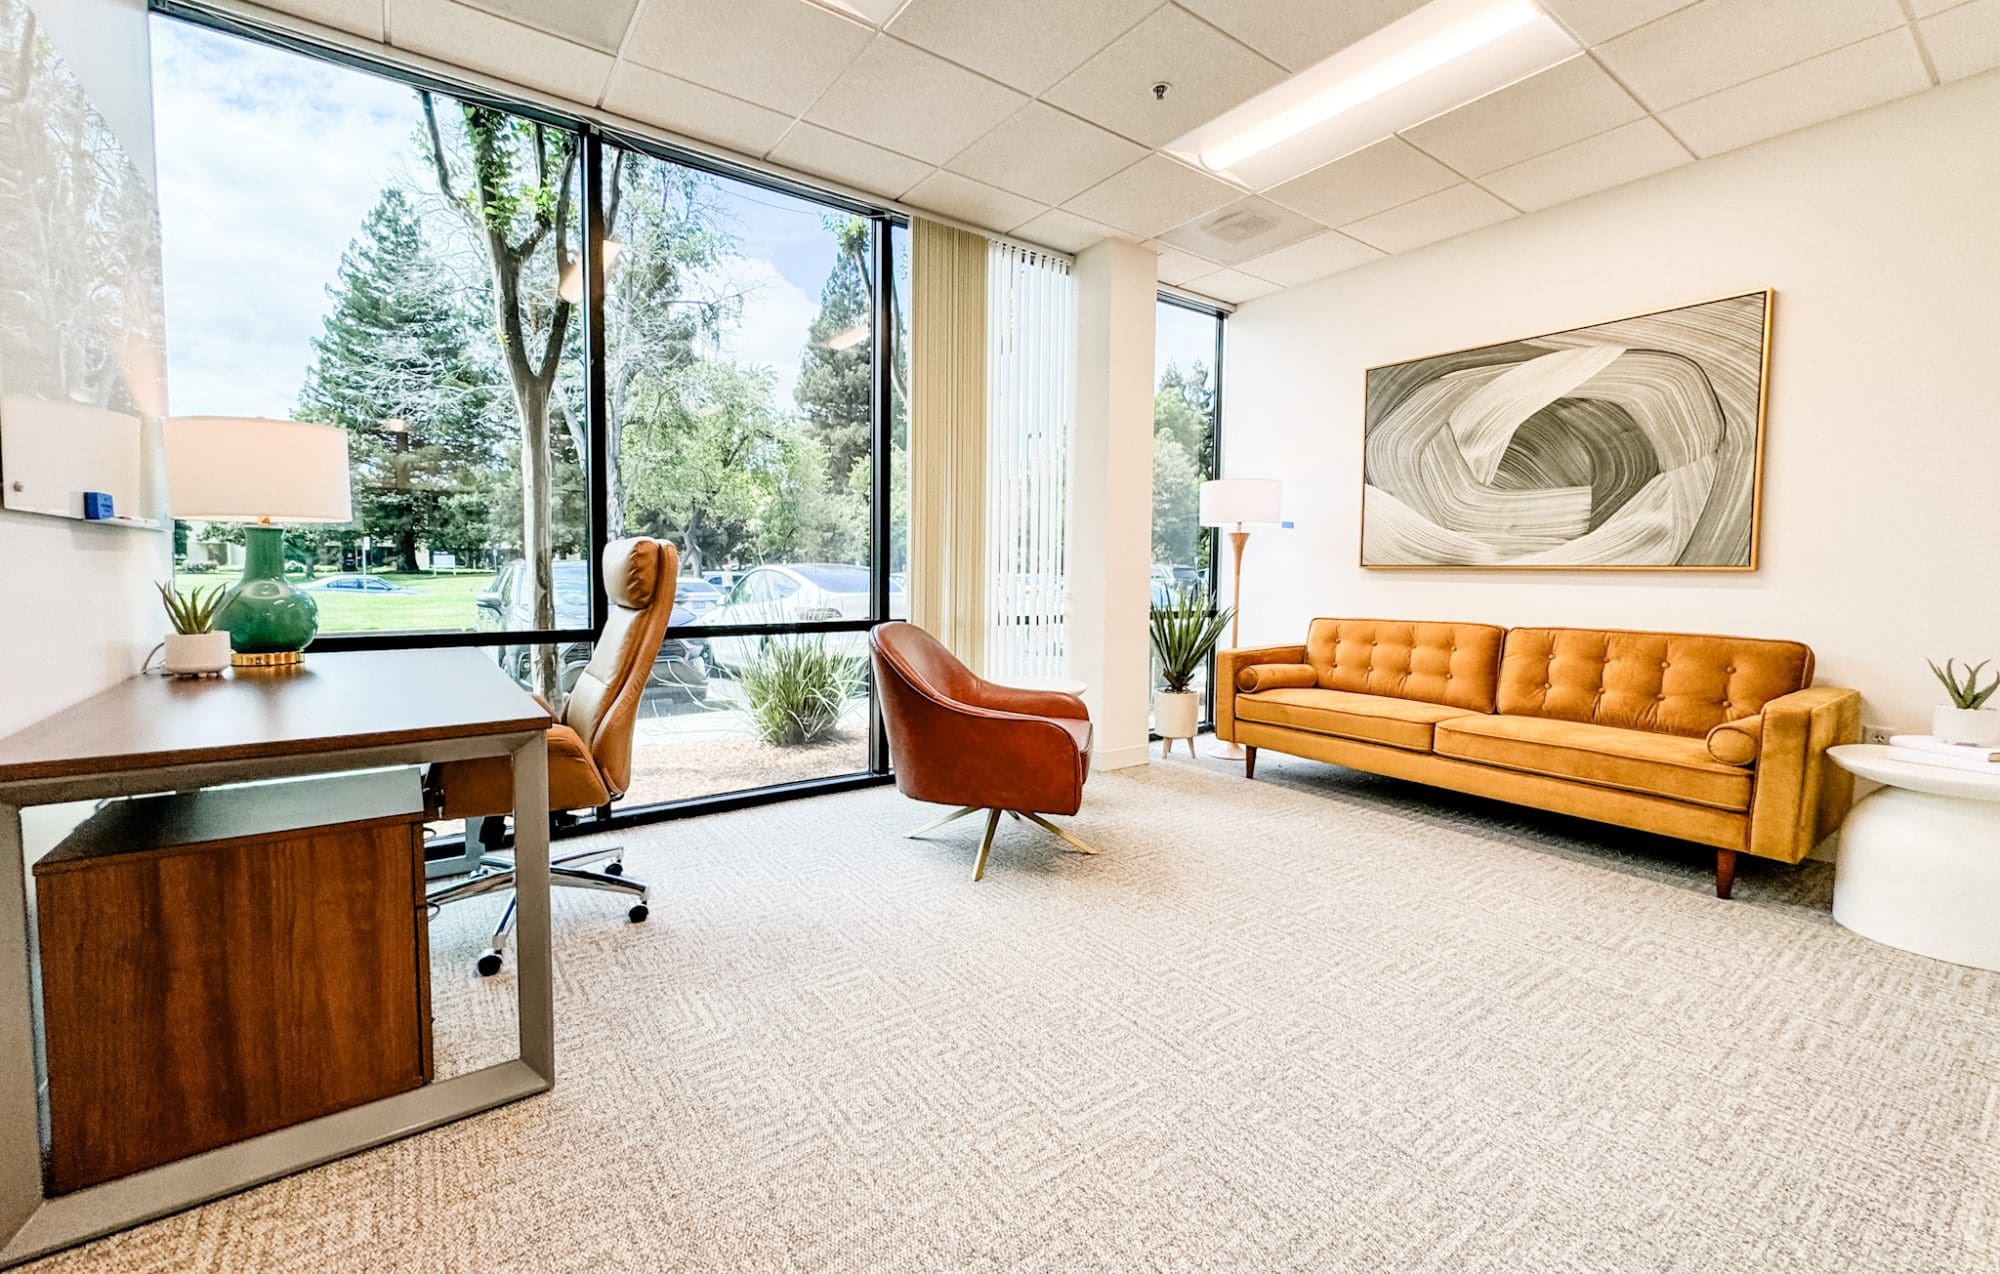 Office for therapy and mental health treatment in outpatient treatment center Walnut Creek, CA.